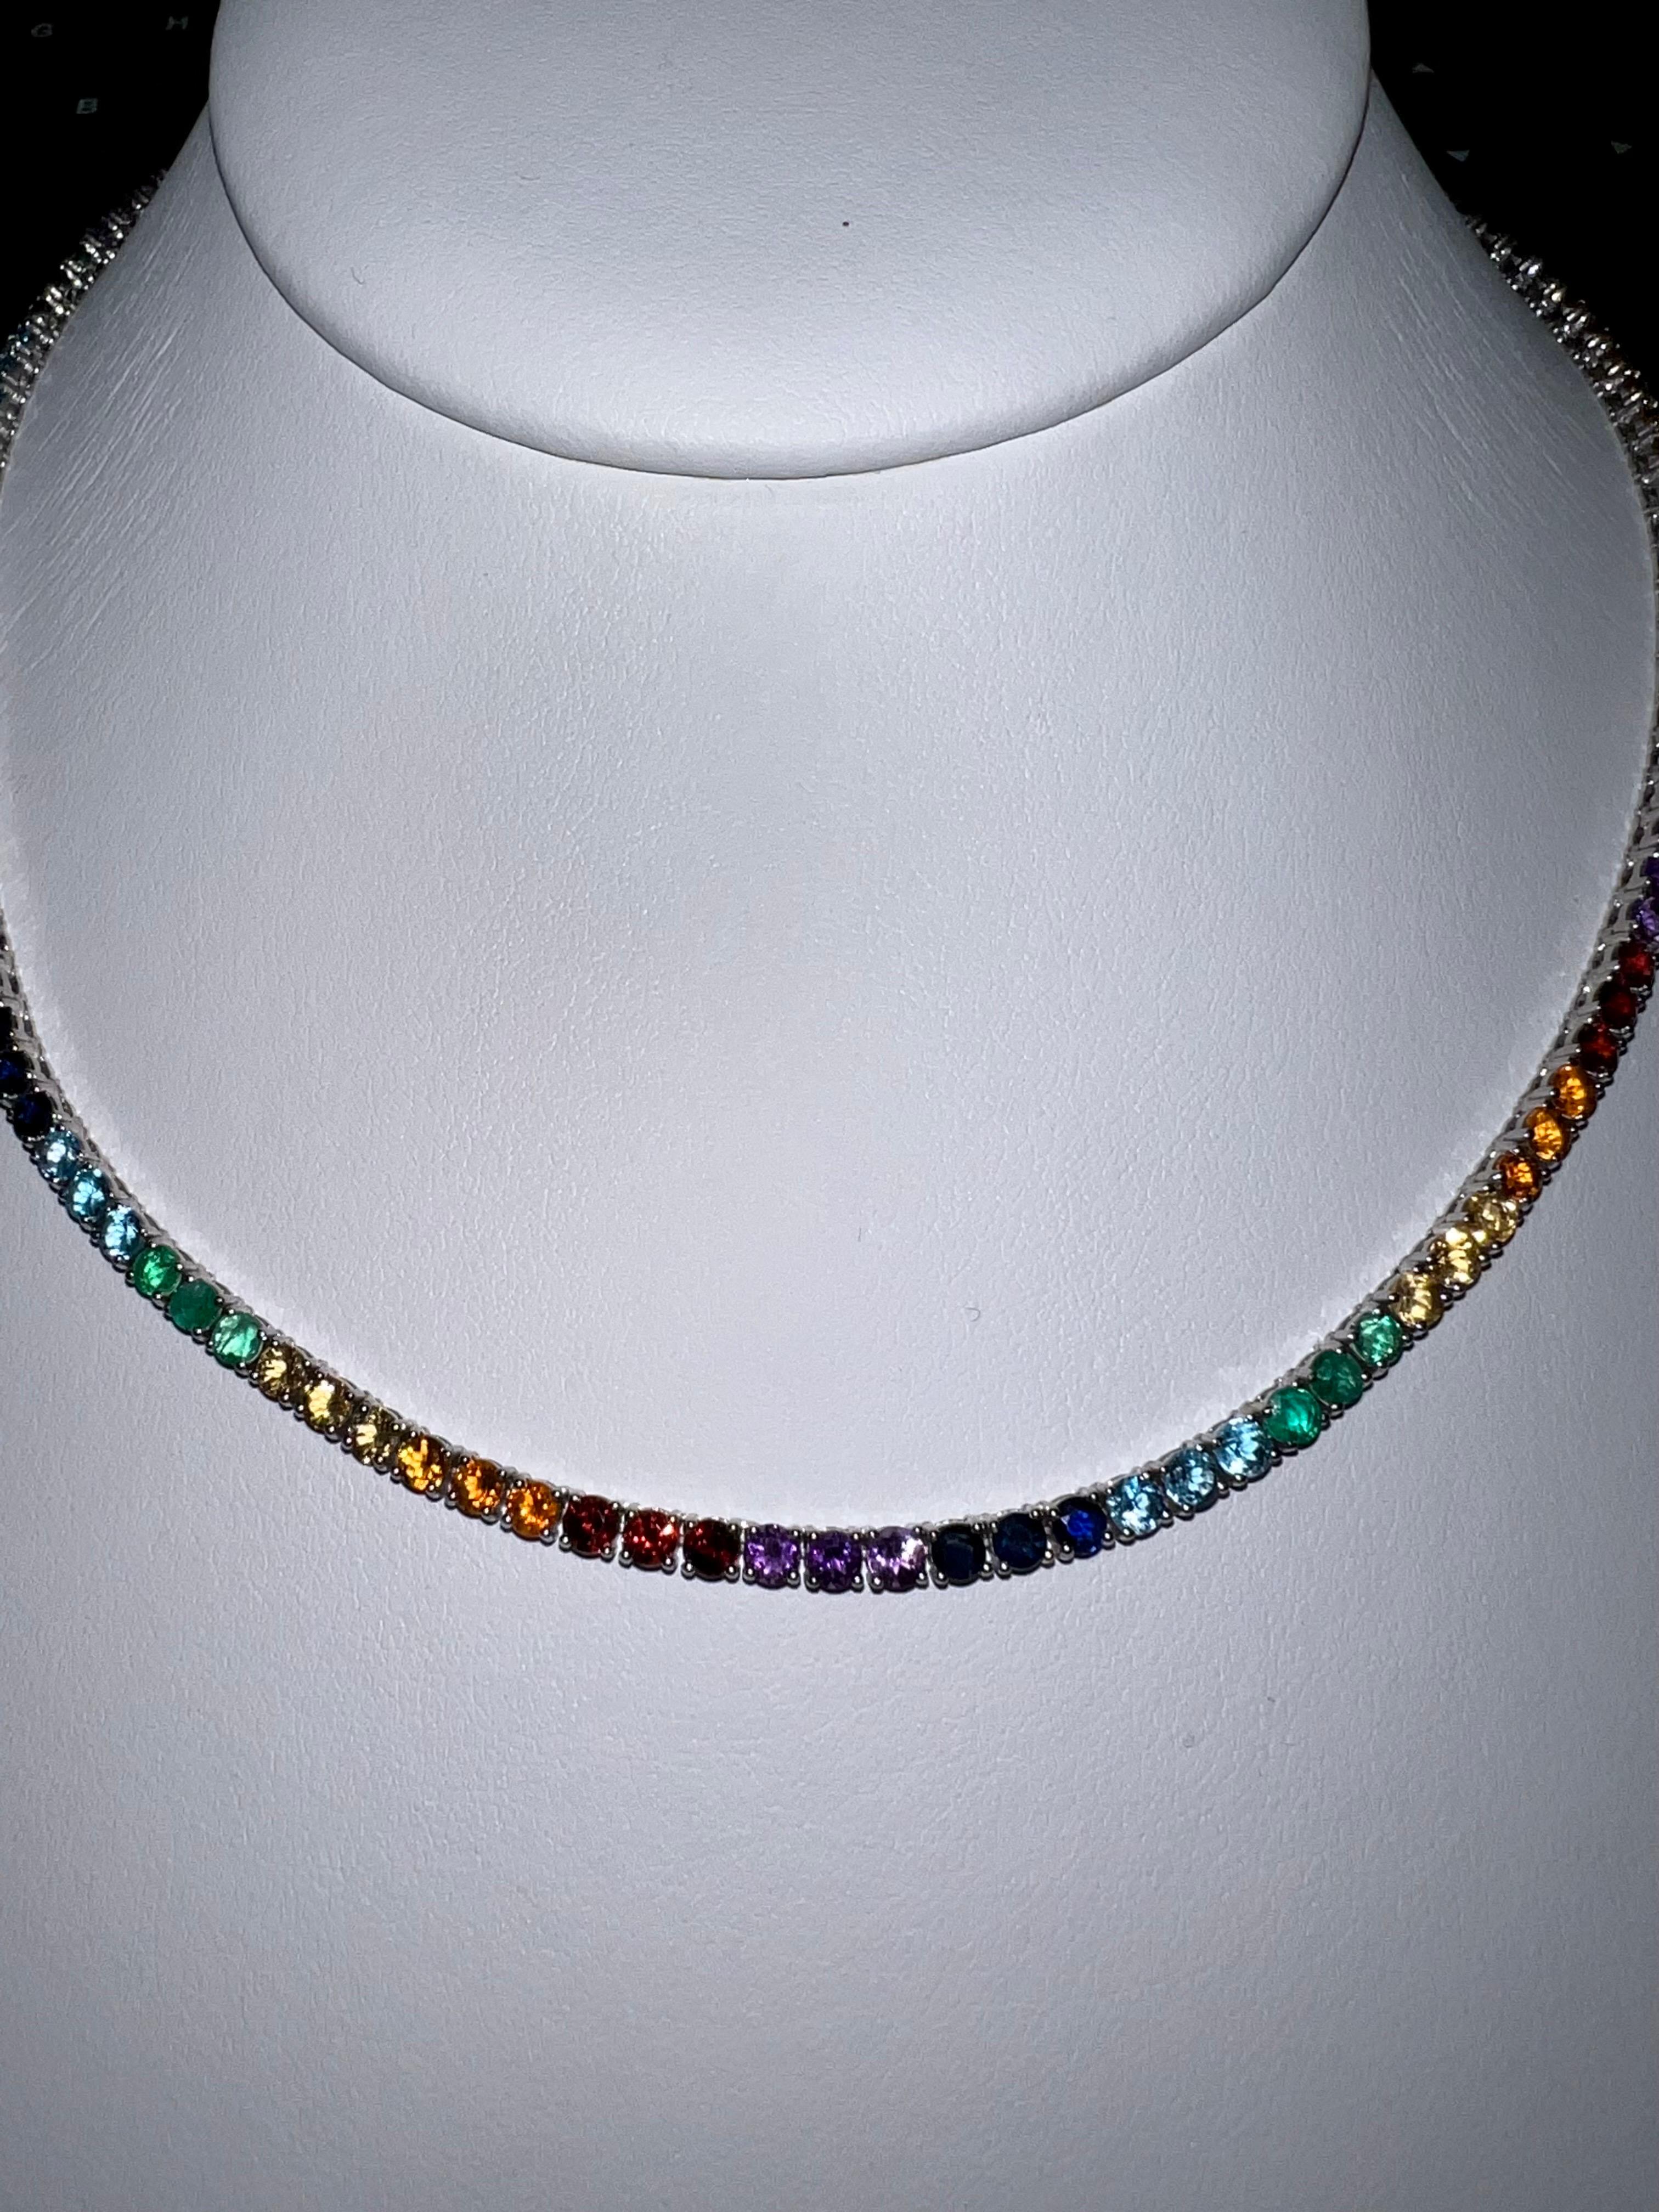 Handmade 18K White Gold Tennis Necklace with 123 Round Brilliant Cut Natural Gemstones in colors of the Rainbow: Sapphires, Emeralds, and Rubies weighting in total of 15.25 carats.
Length of the necklace is 16 inches

Viewings available in our NYC